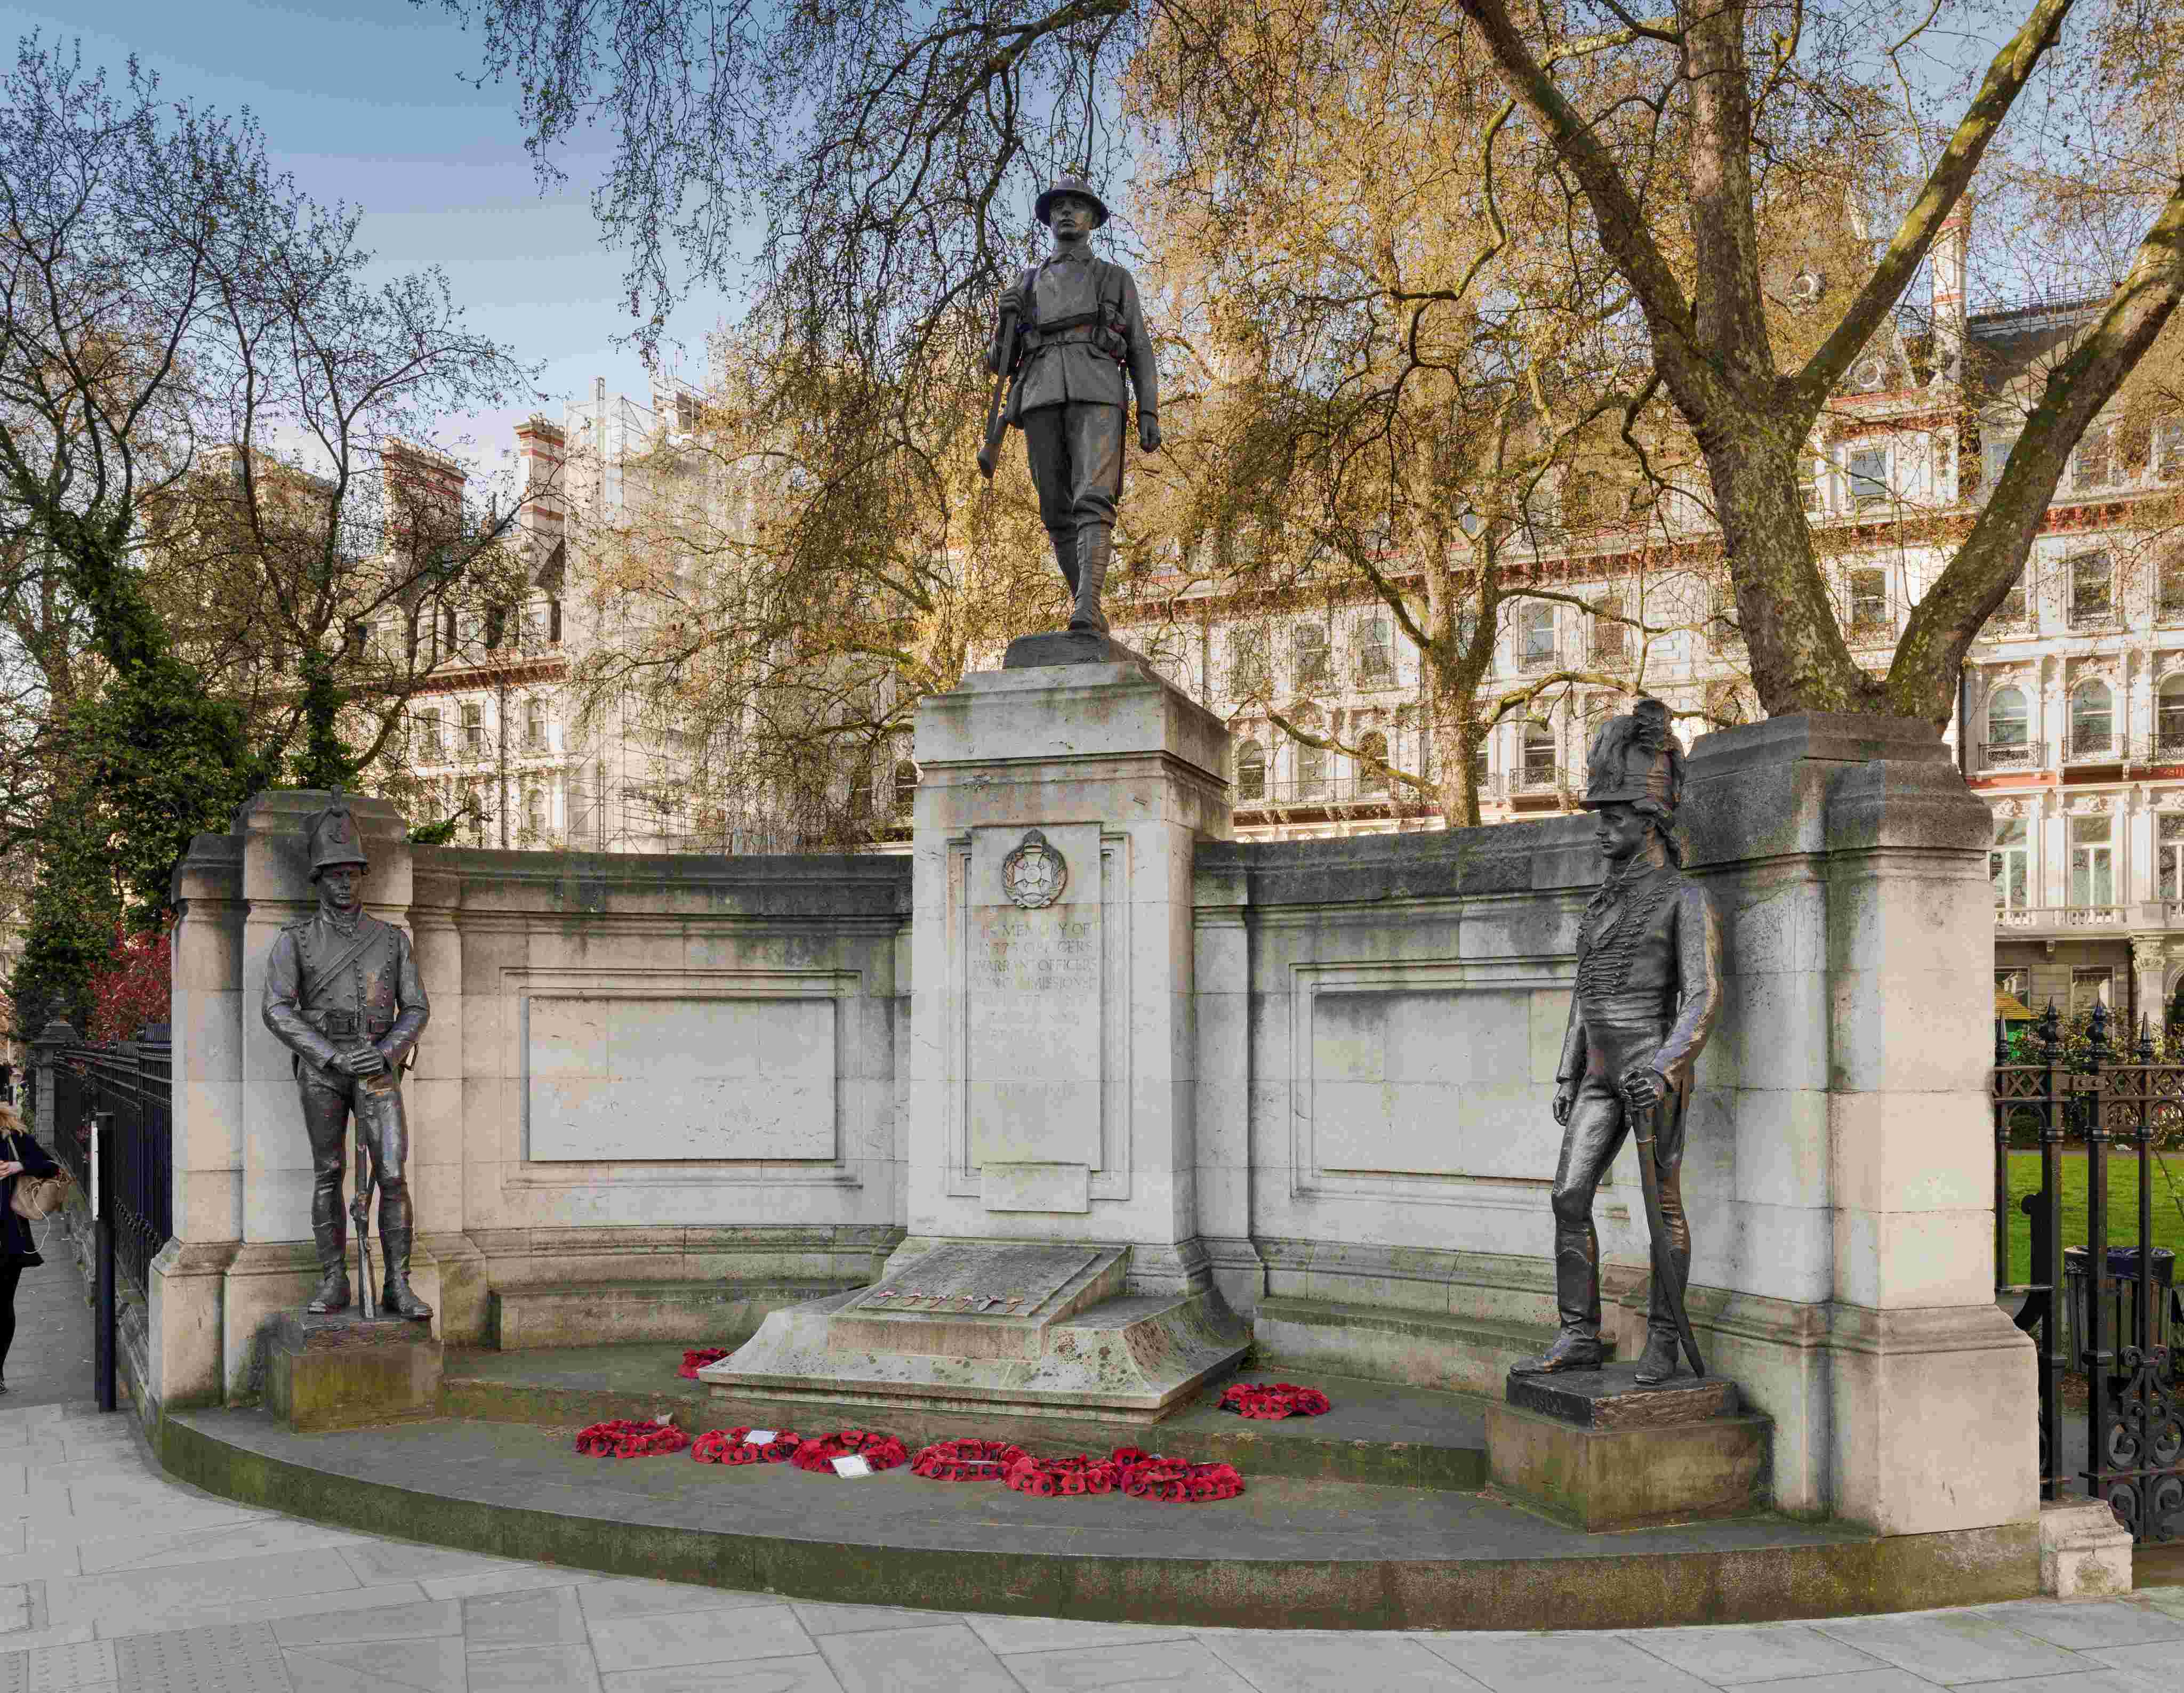 Image of The Rifle Brigade War Memorial, Grosvenor Gardens, Westminster, London, newly upgraded to II*. John Tweed, a leading sculptor of his day, here created a memorial which linked modern bravery with the illustrious past of this regiment: the marching Tommy is flanked by statues of a Napoleonic Rifleman and officer, alluding to the volunteer unit’s proud history. It lost 11,575 men over the course of the First World War.